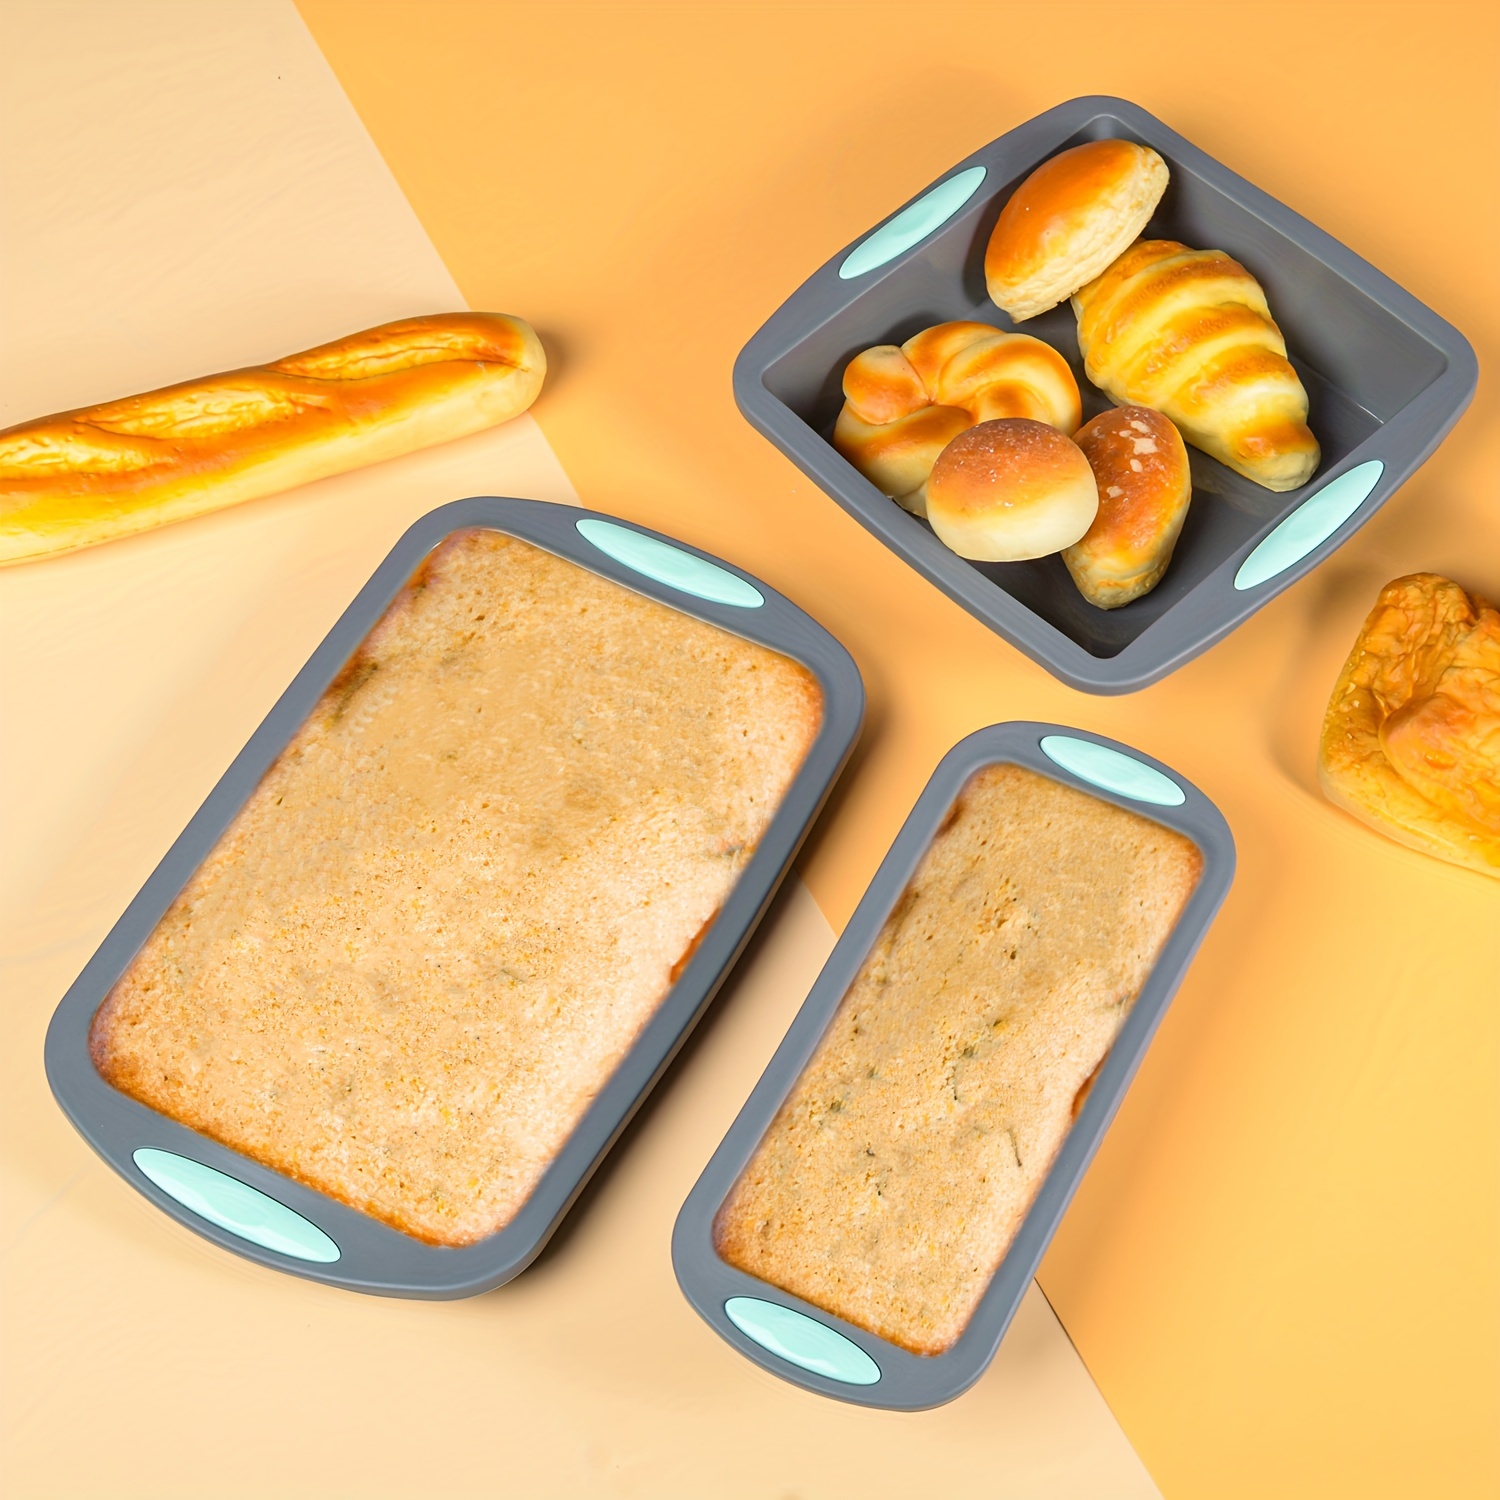 

3pcs, Silicone Baking Bread Pan Set, Silicone Cake Molds, 230℃ Heat Resistant Baking Sheet, Dishwasher Safe, Non-stick, Baking Tools, Oven Accessories, Kitchen Gadgets, Kitchen Accessories